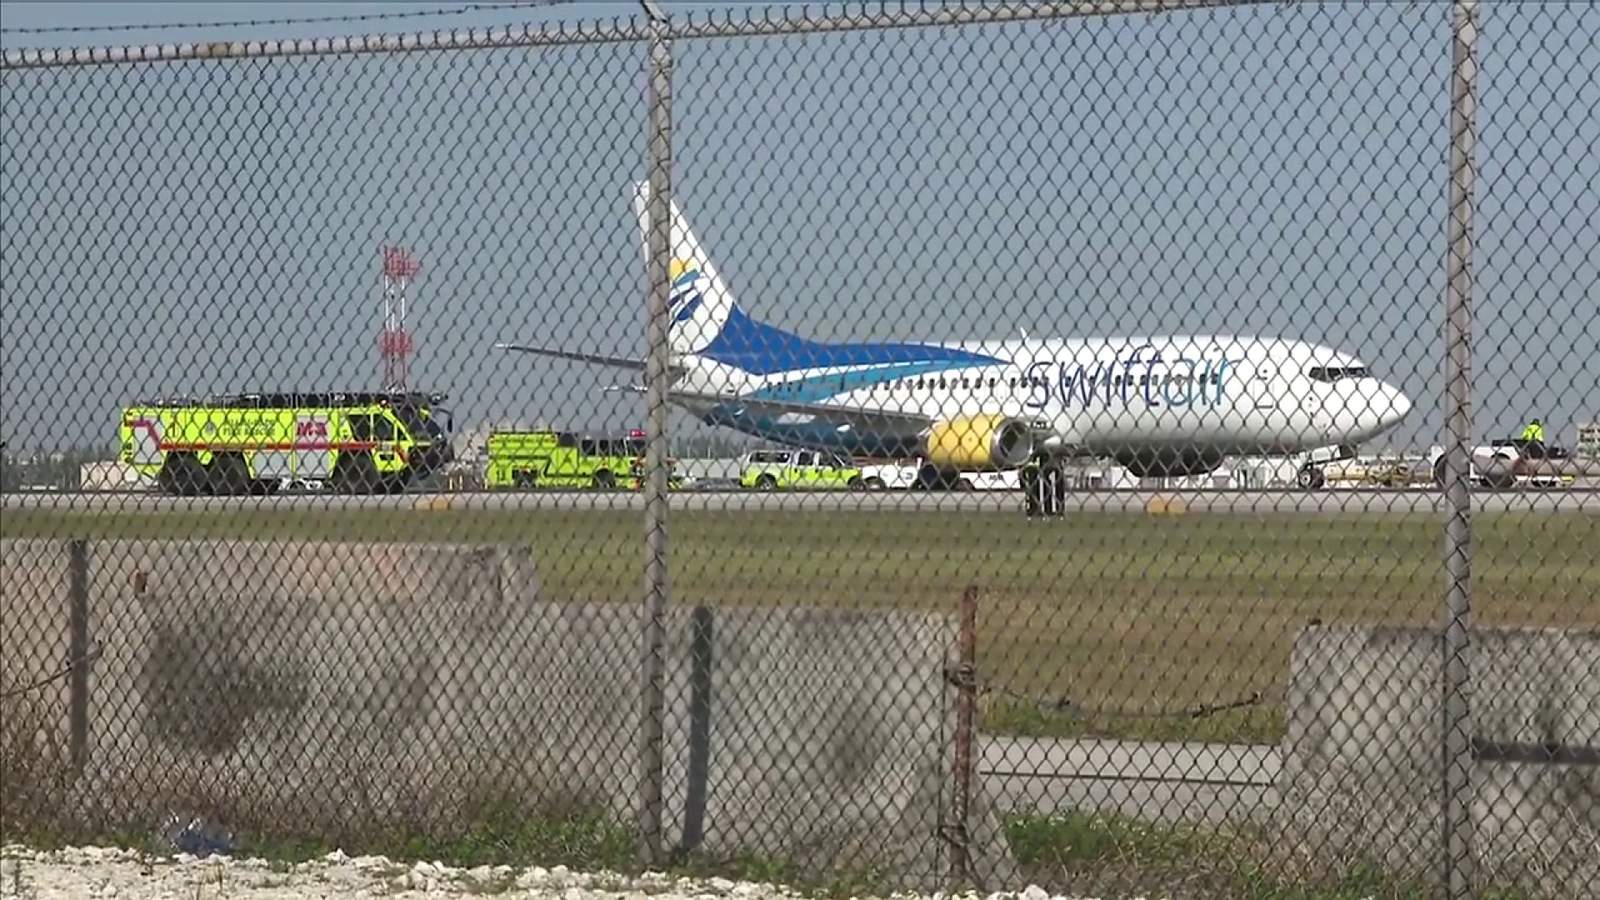 Charter flight from Miami to Cuba turns around due to possible mechanical issue